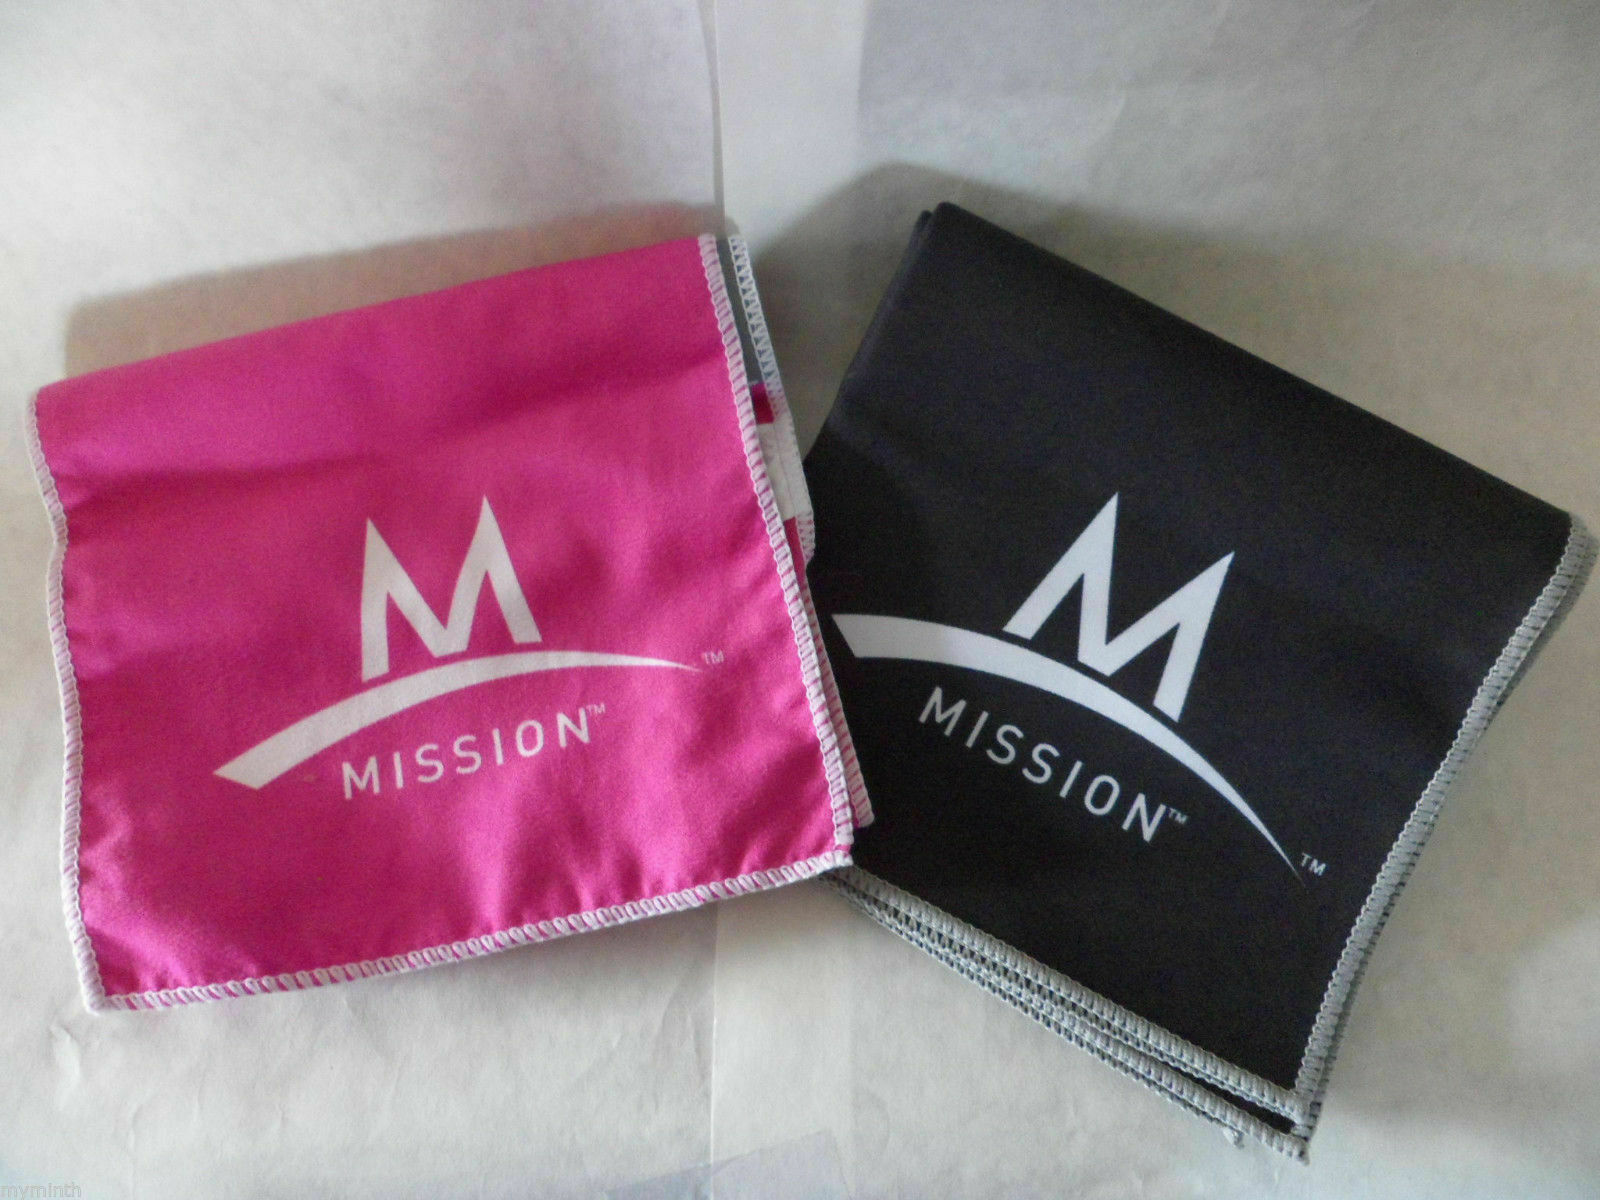 3 Pc Set Mission Enduracool Instant Cooling Fabric Towel 2 Pink And 1 Black